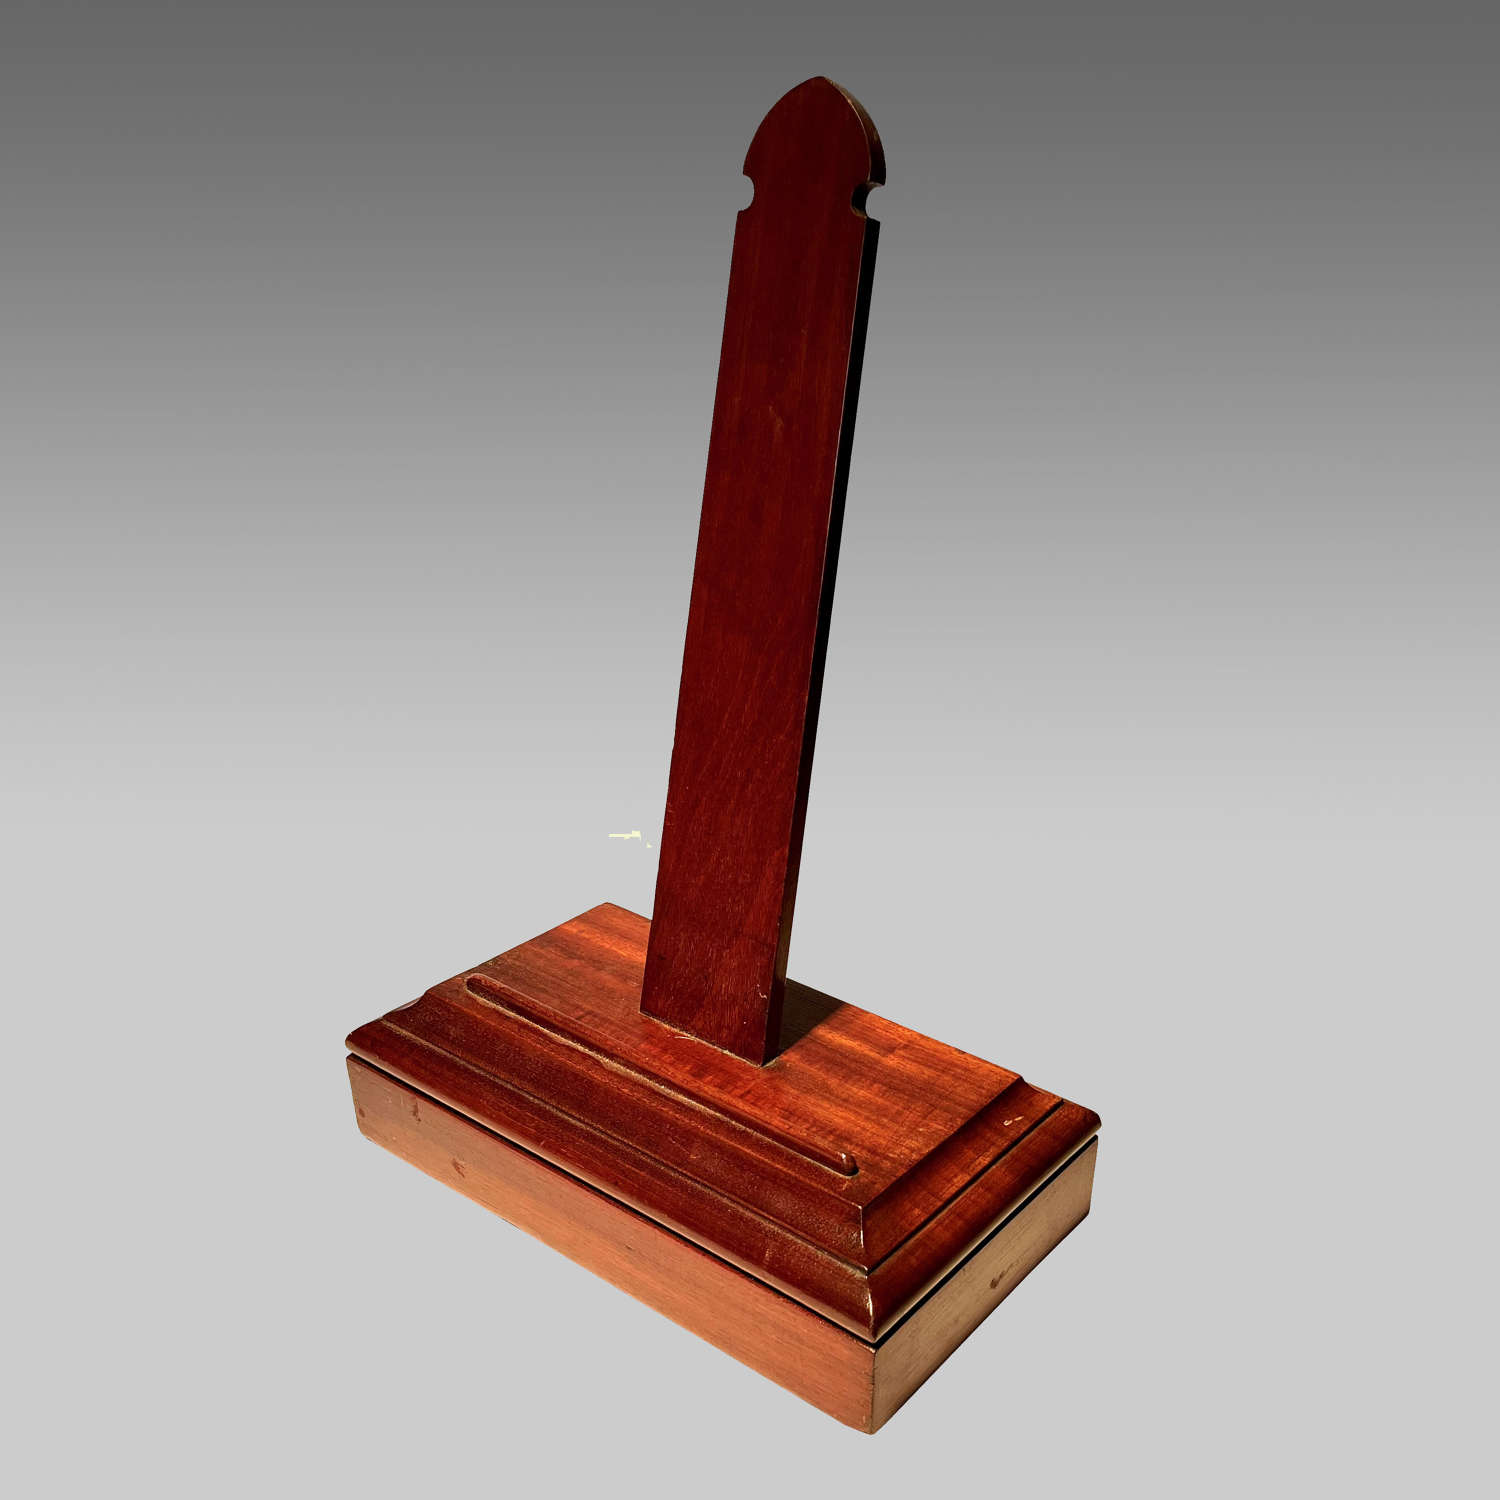 Mahogany tray or picture stand